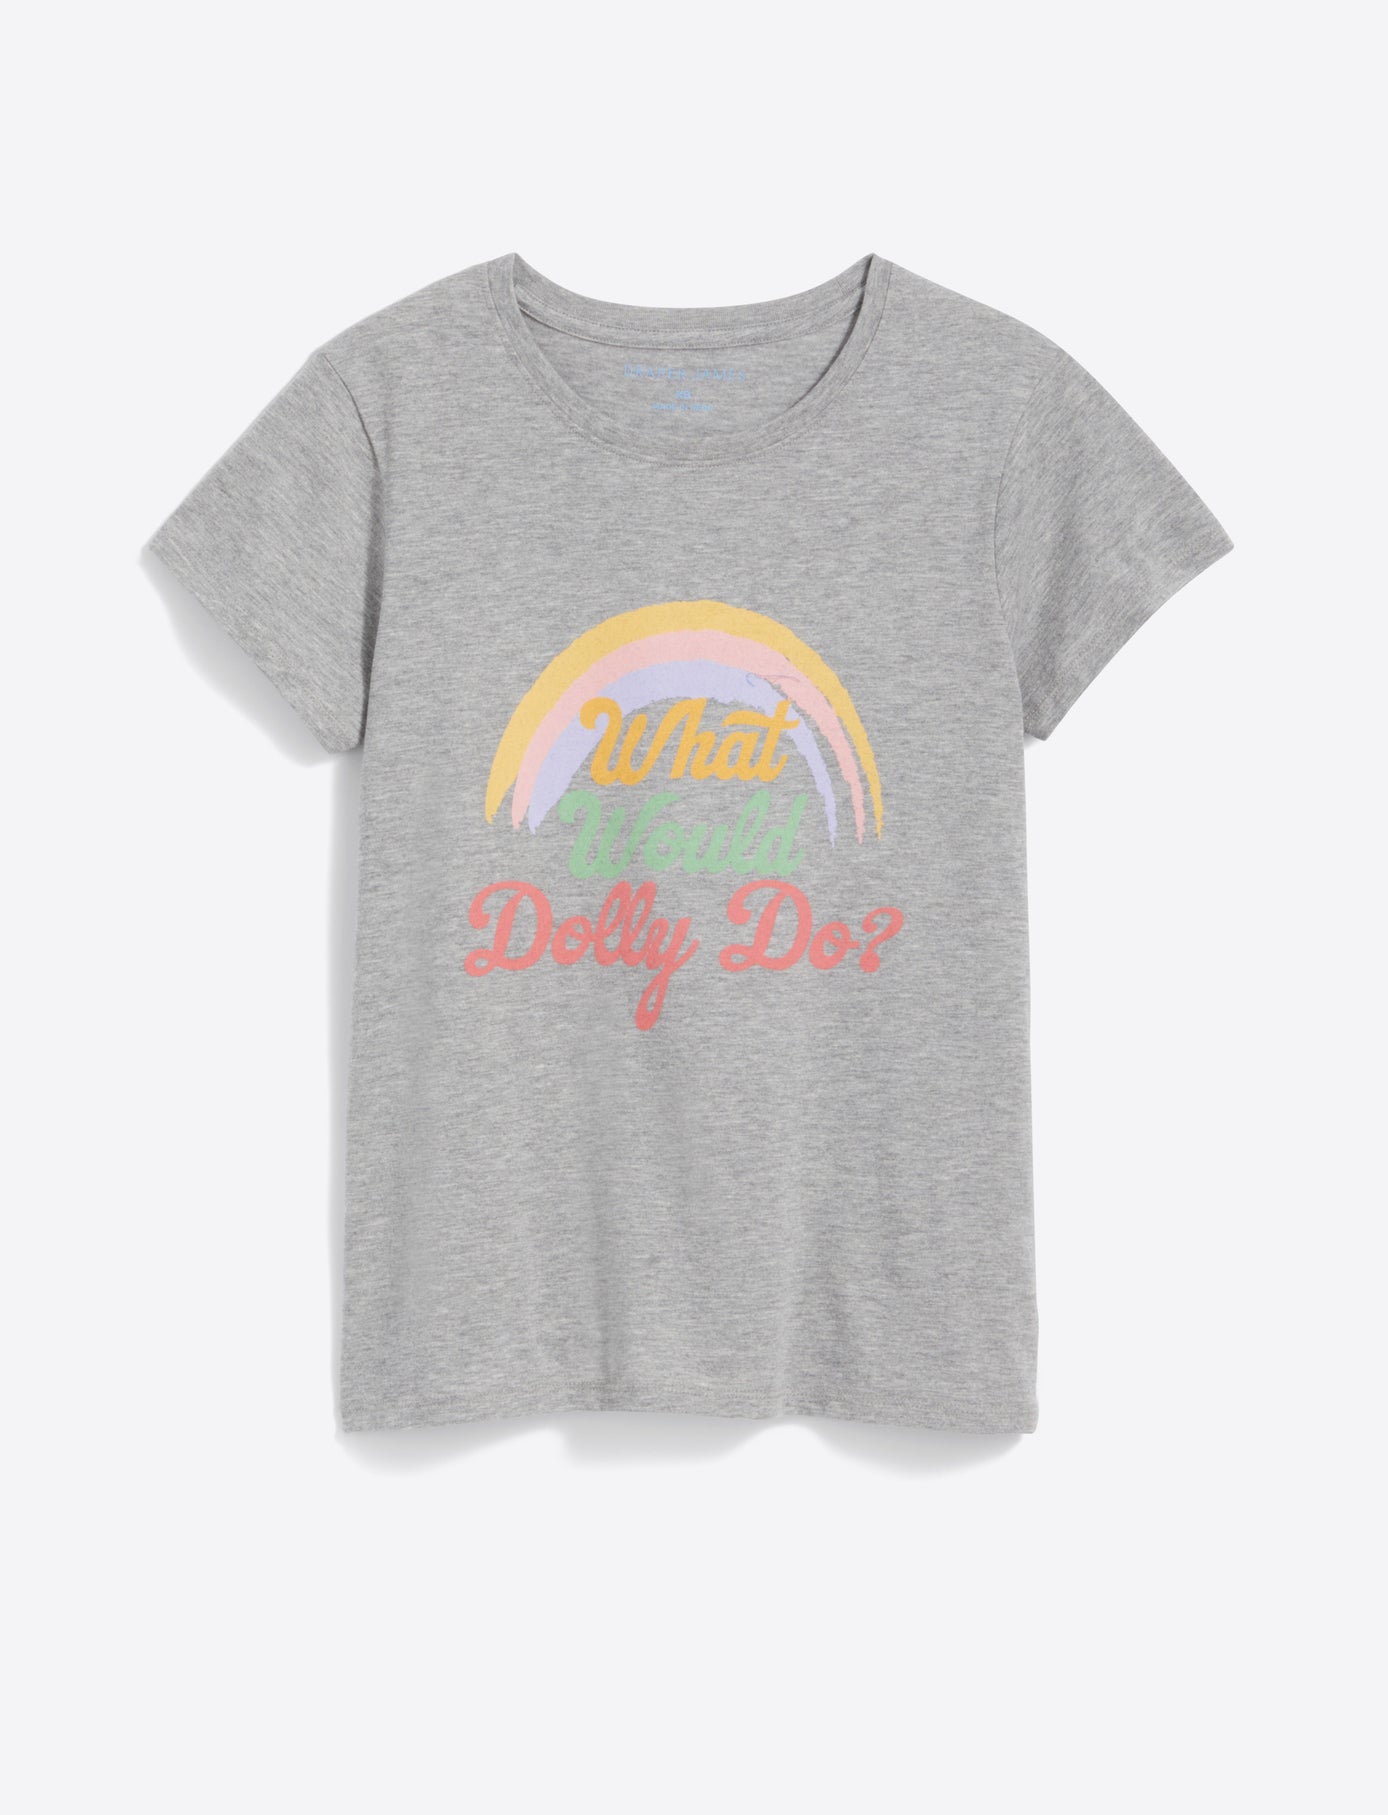 What Would Dolly Do Rainbow T-Shirt